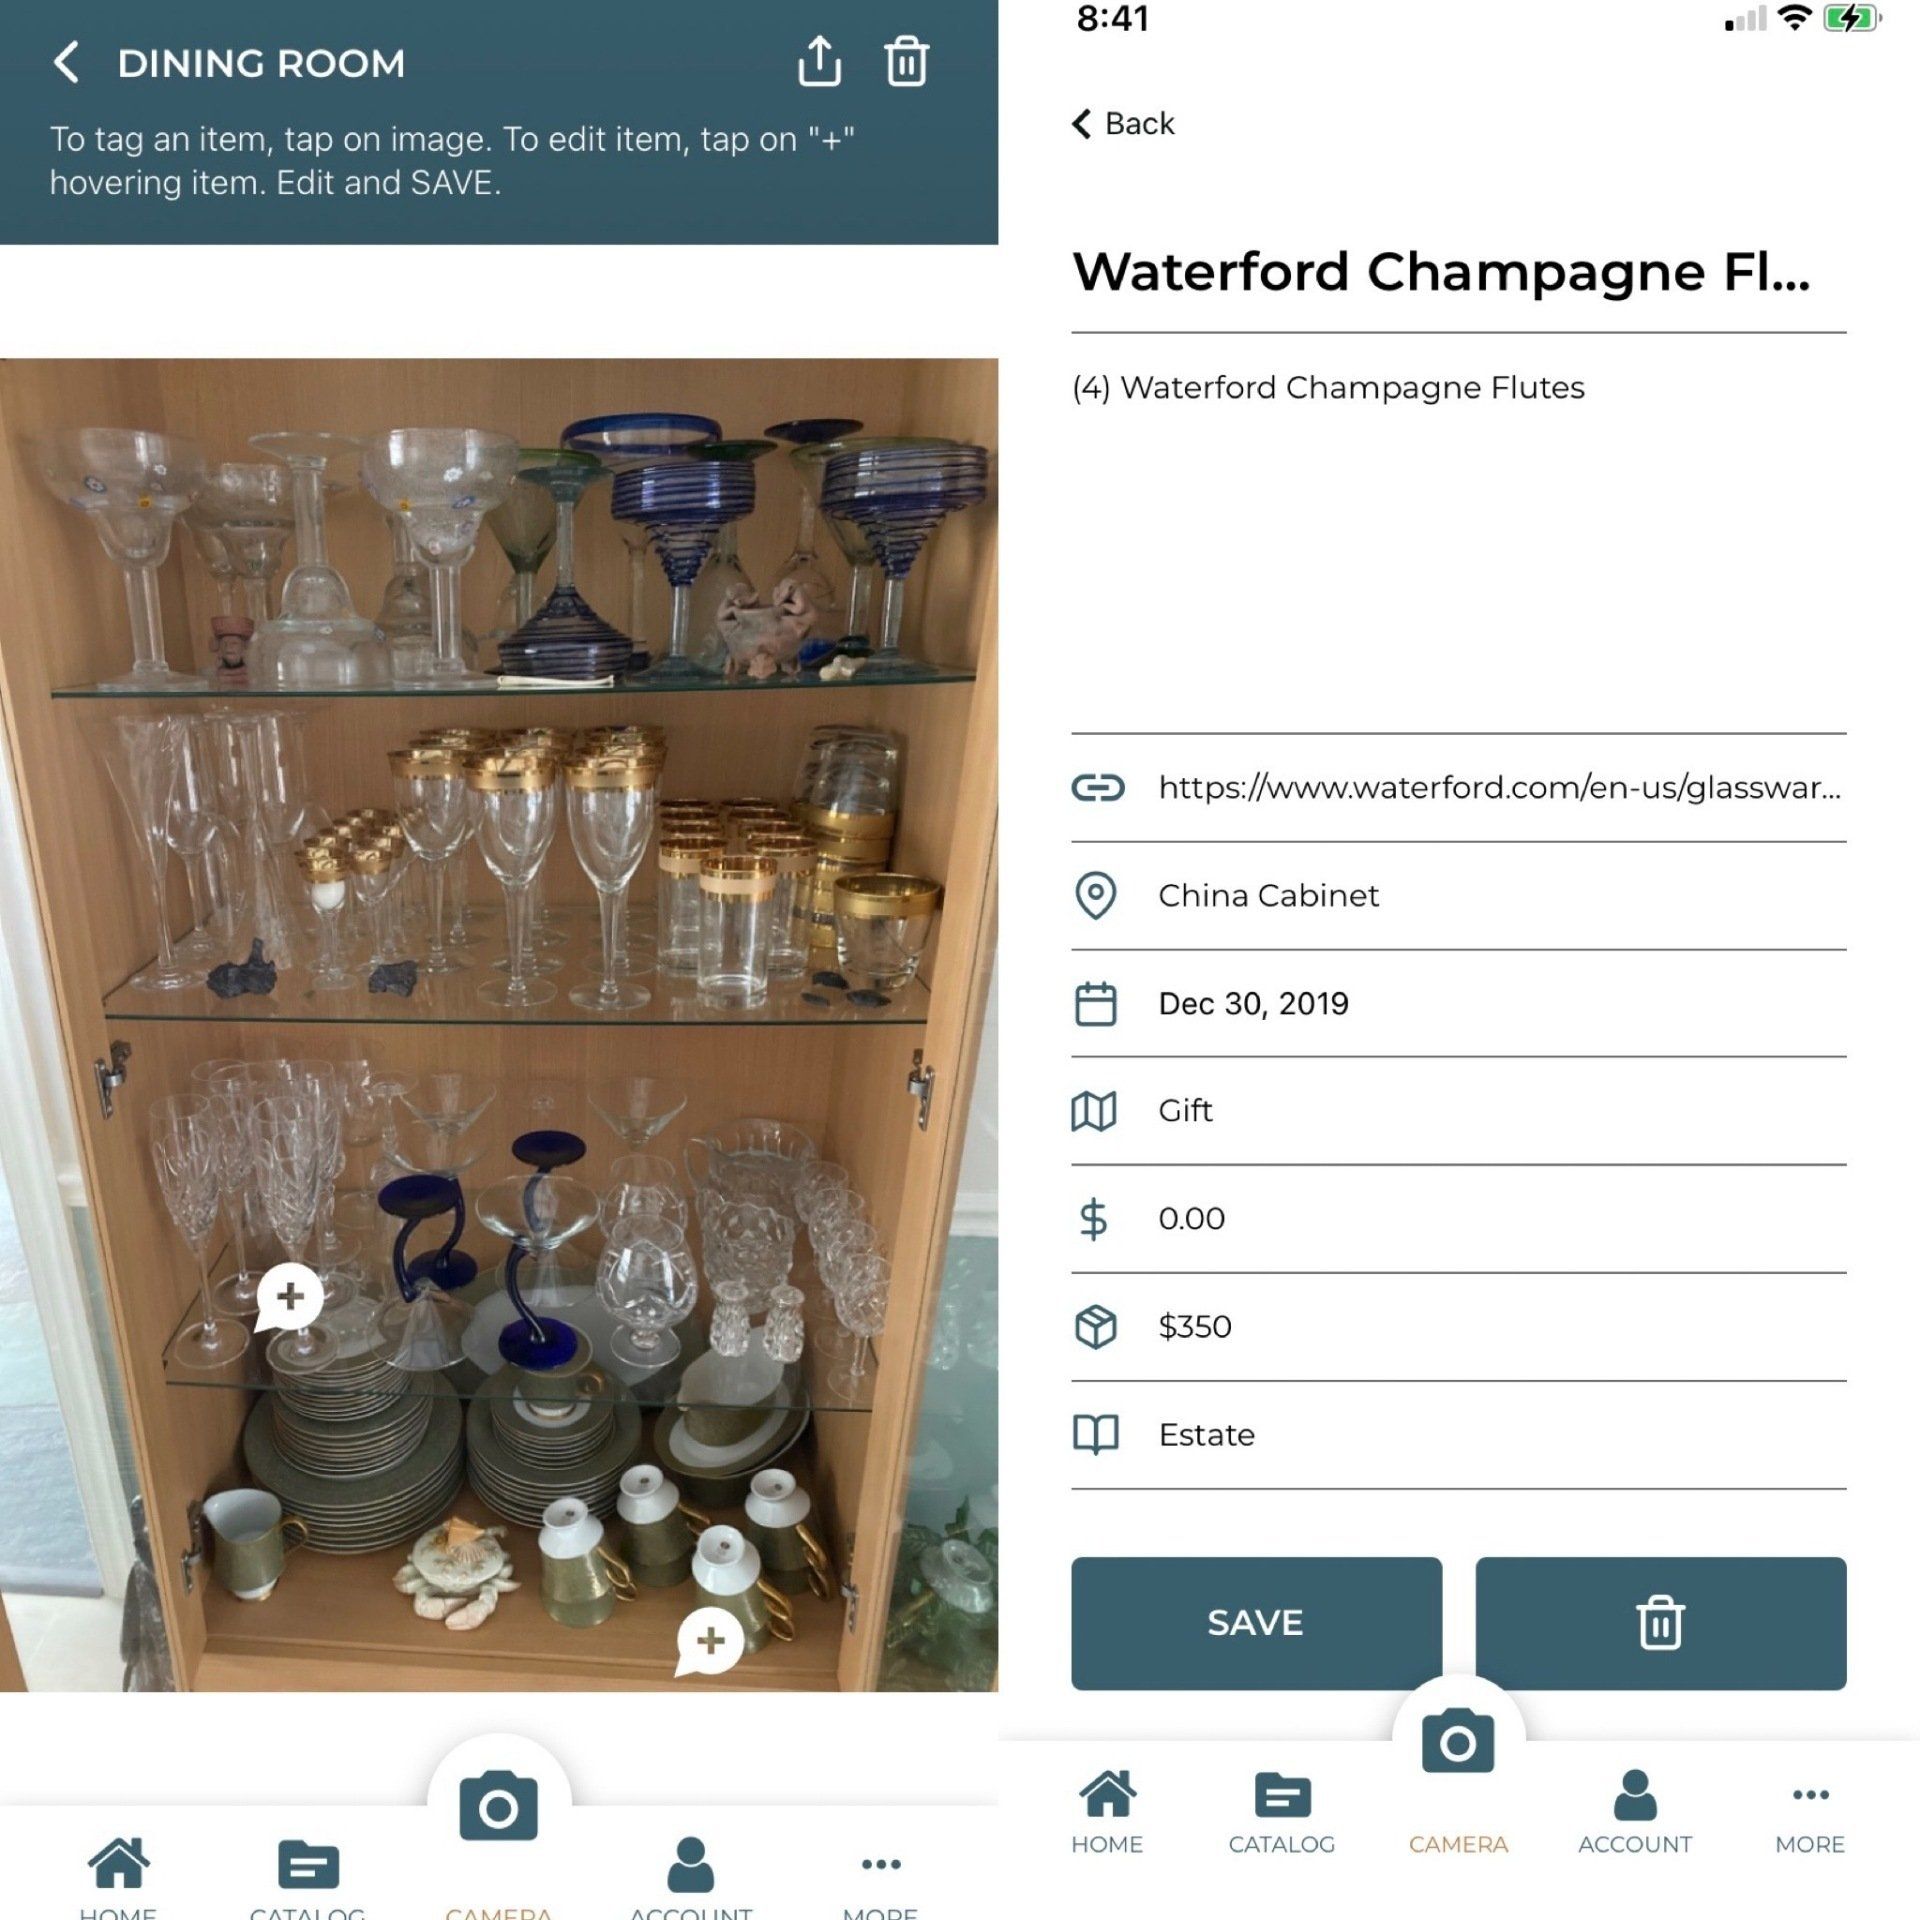 ItemEyes App – Apple/Android Photographic Inventory System Launched